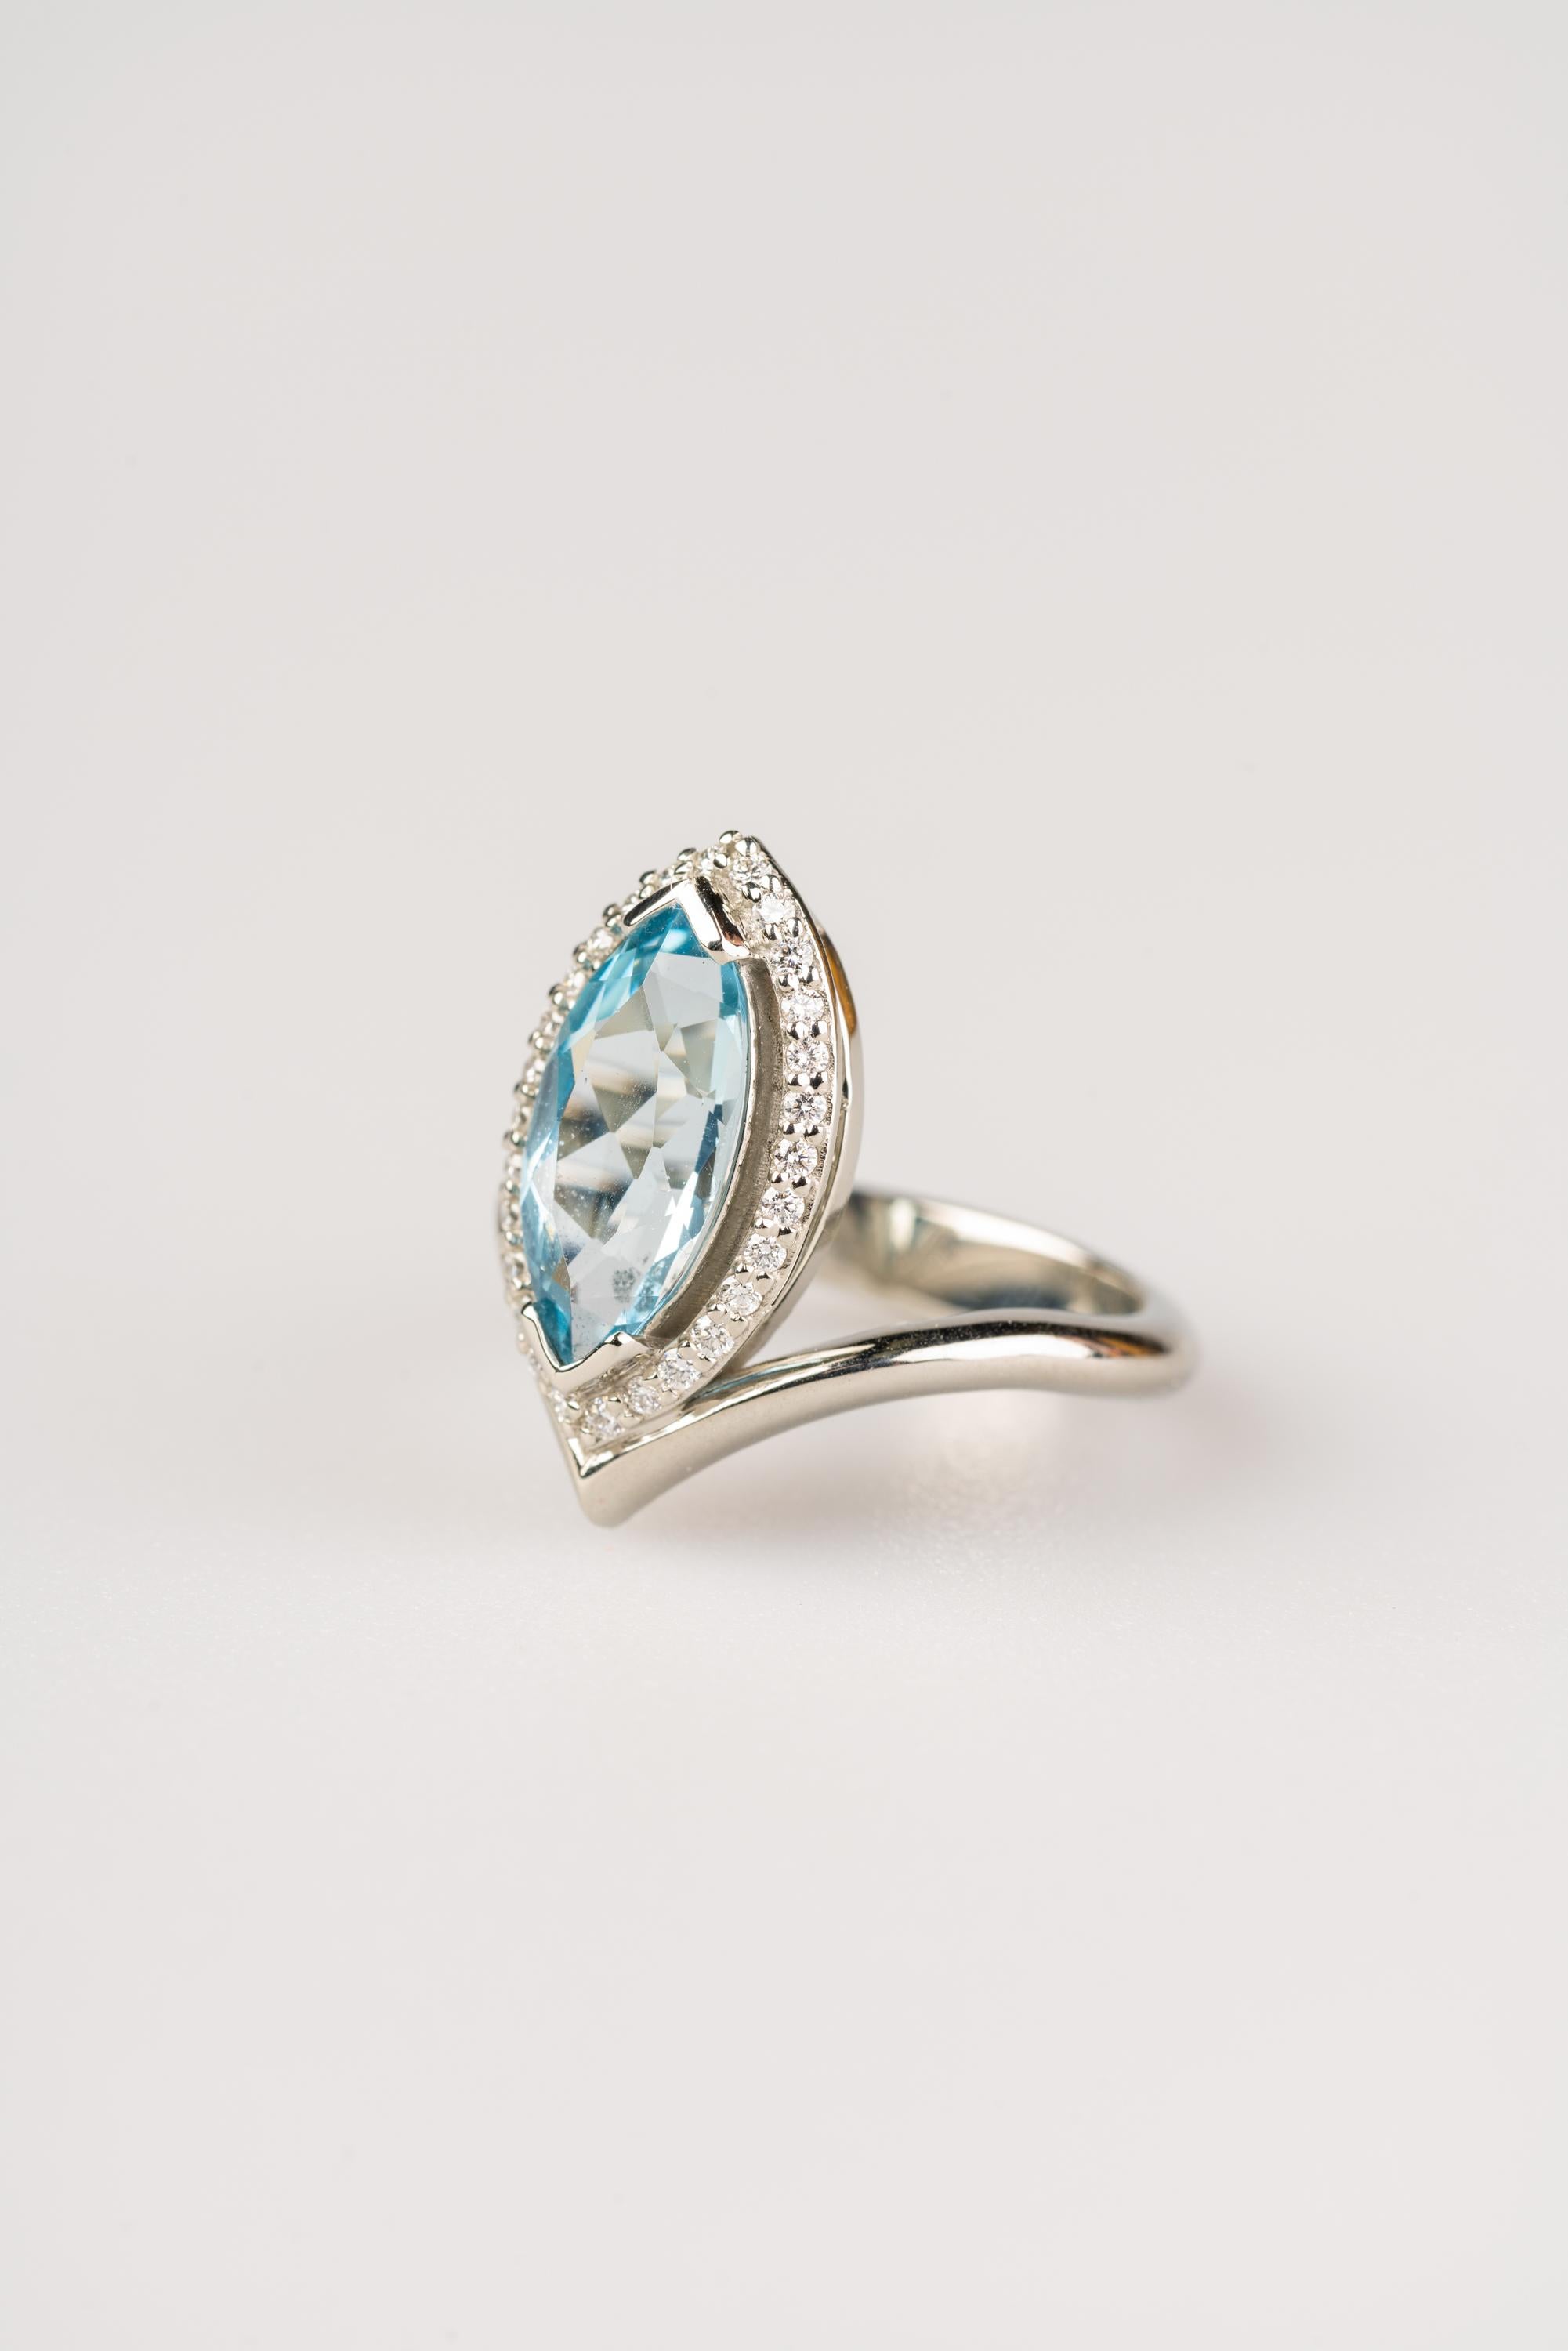 An 18k white gold ring set with one 2.29 carat marquise shaped aquamarine, and a halo of (28) 1.2mm white round diamonds, F color VS clarity (.18 carats). Ring size 7.  This ring was made and designed by llyn strong.